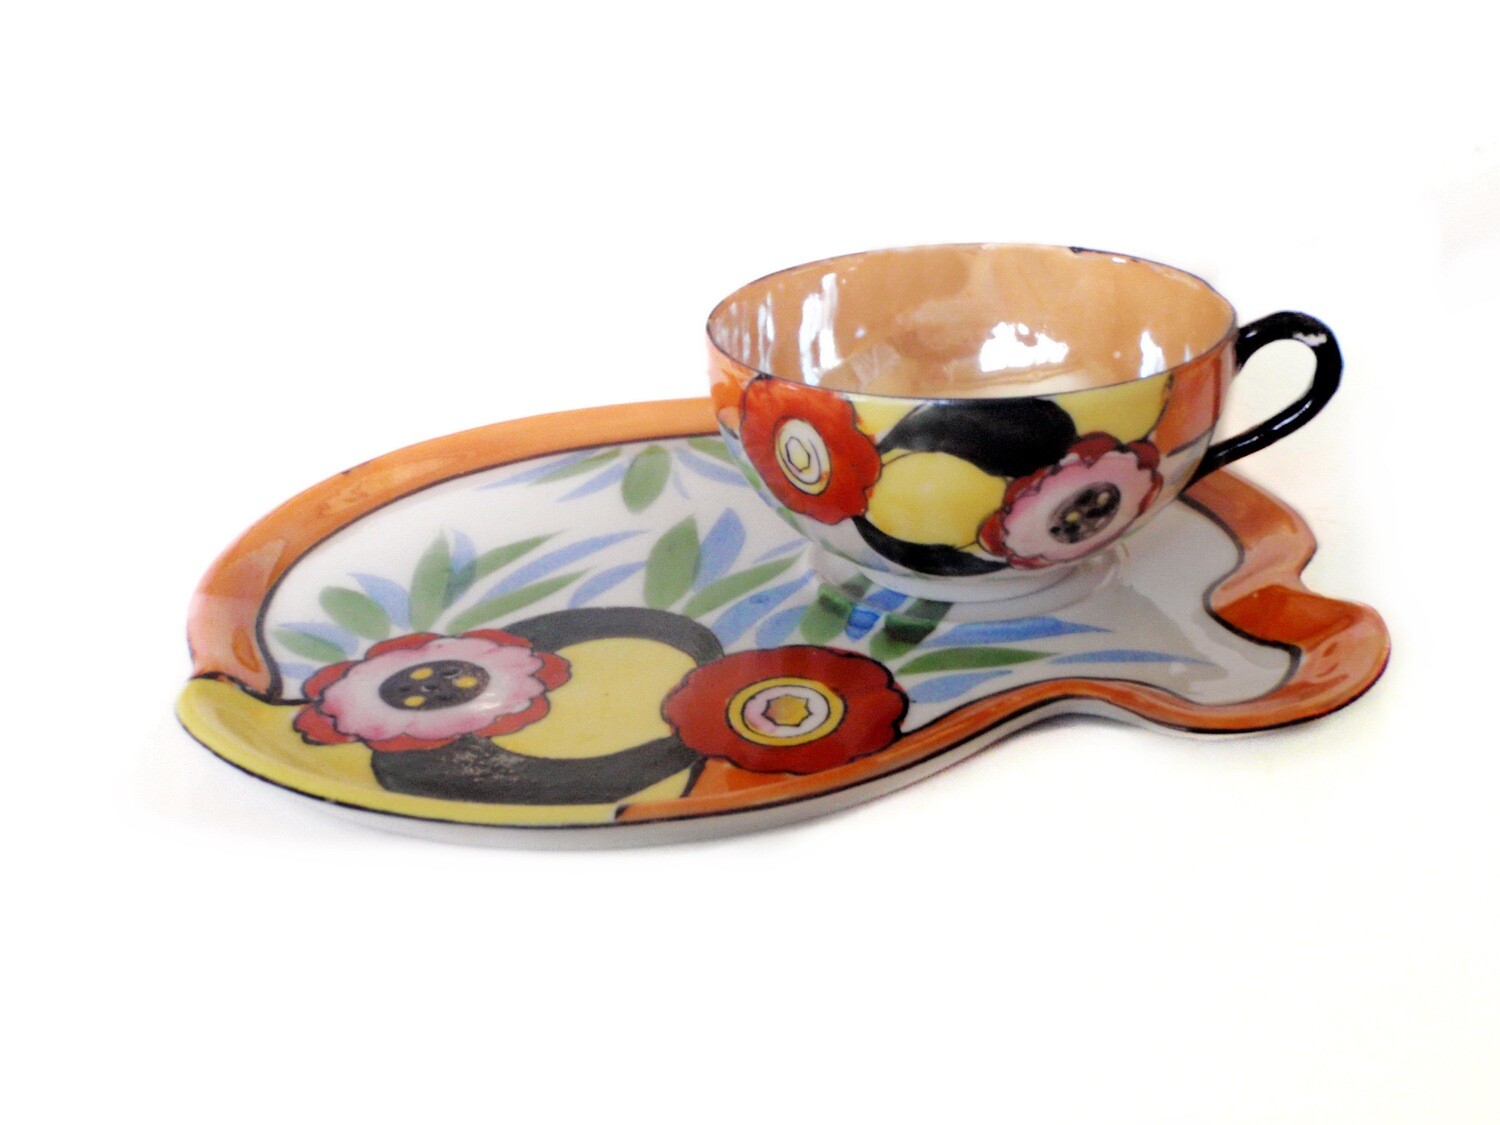 2 Art Deco Bold Hand Painted 1920s Snack Luncheon Set